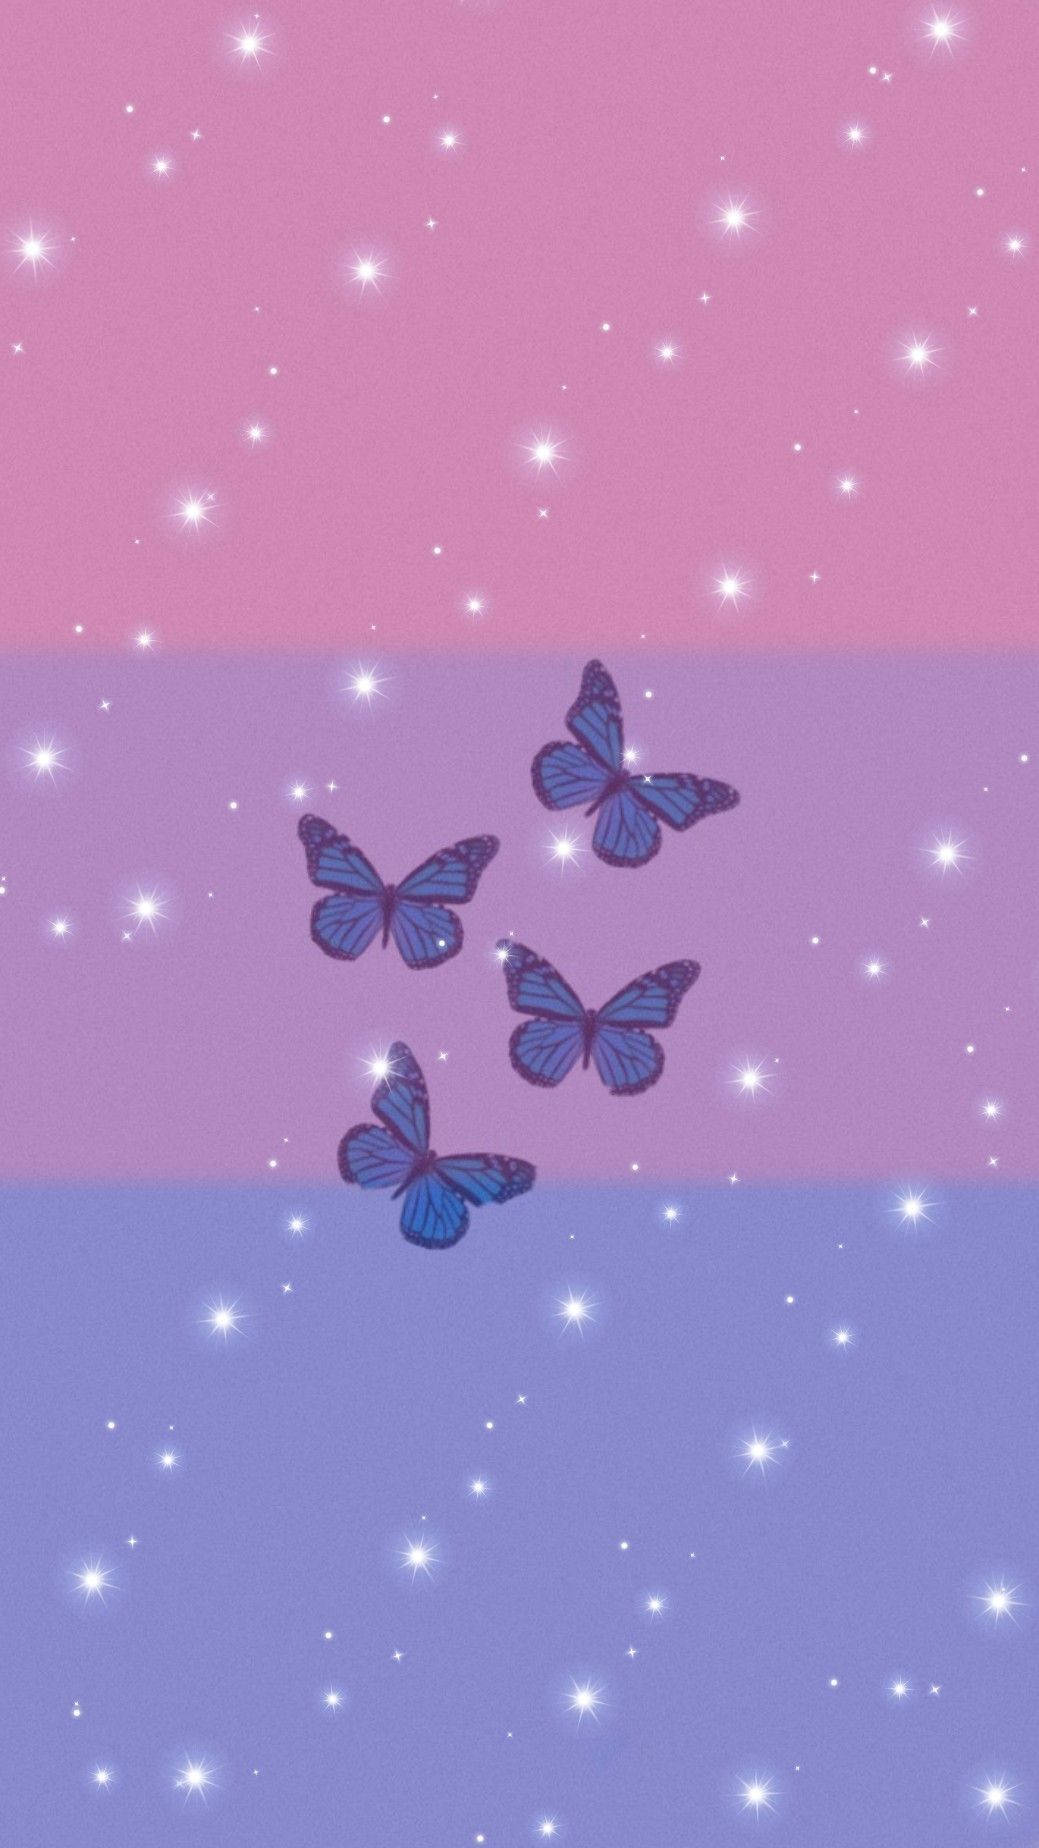 Bisexual Butterflies And Sparkles Wallpaper